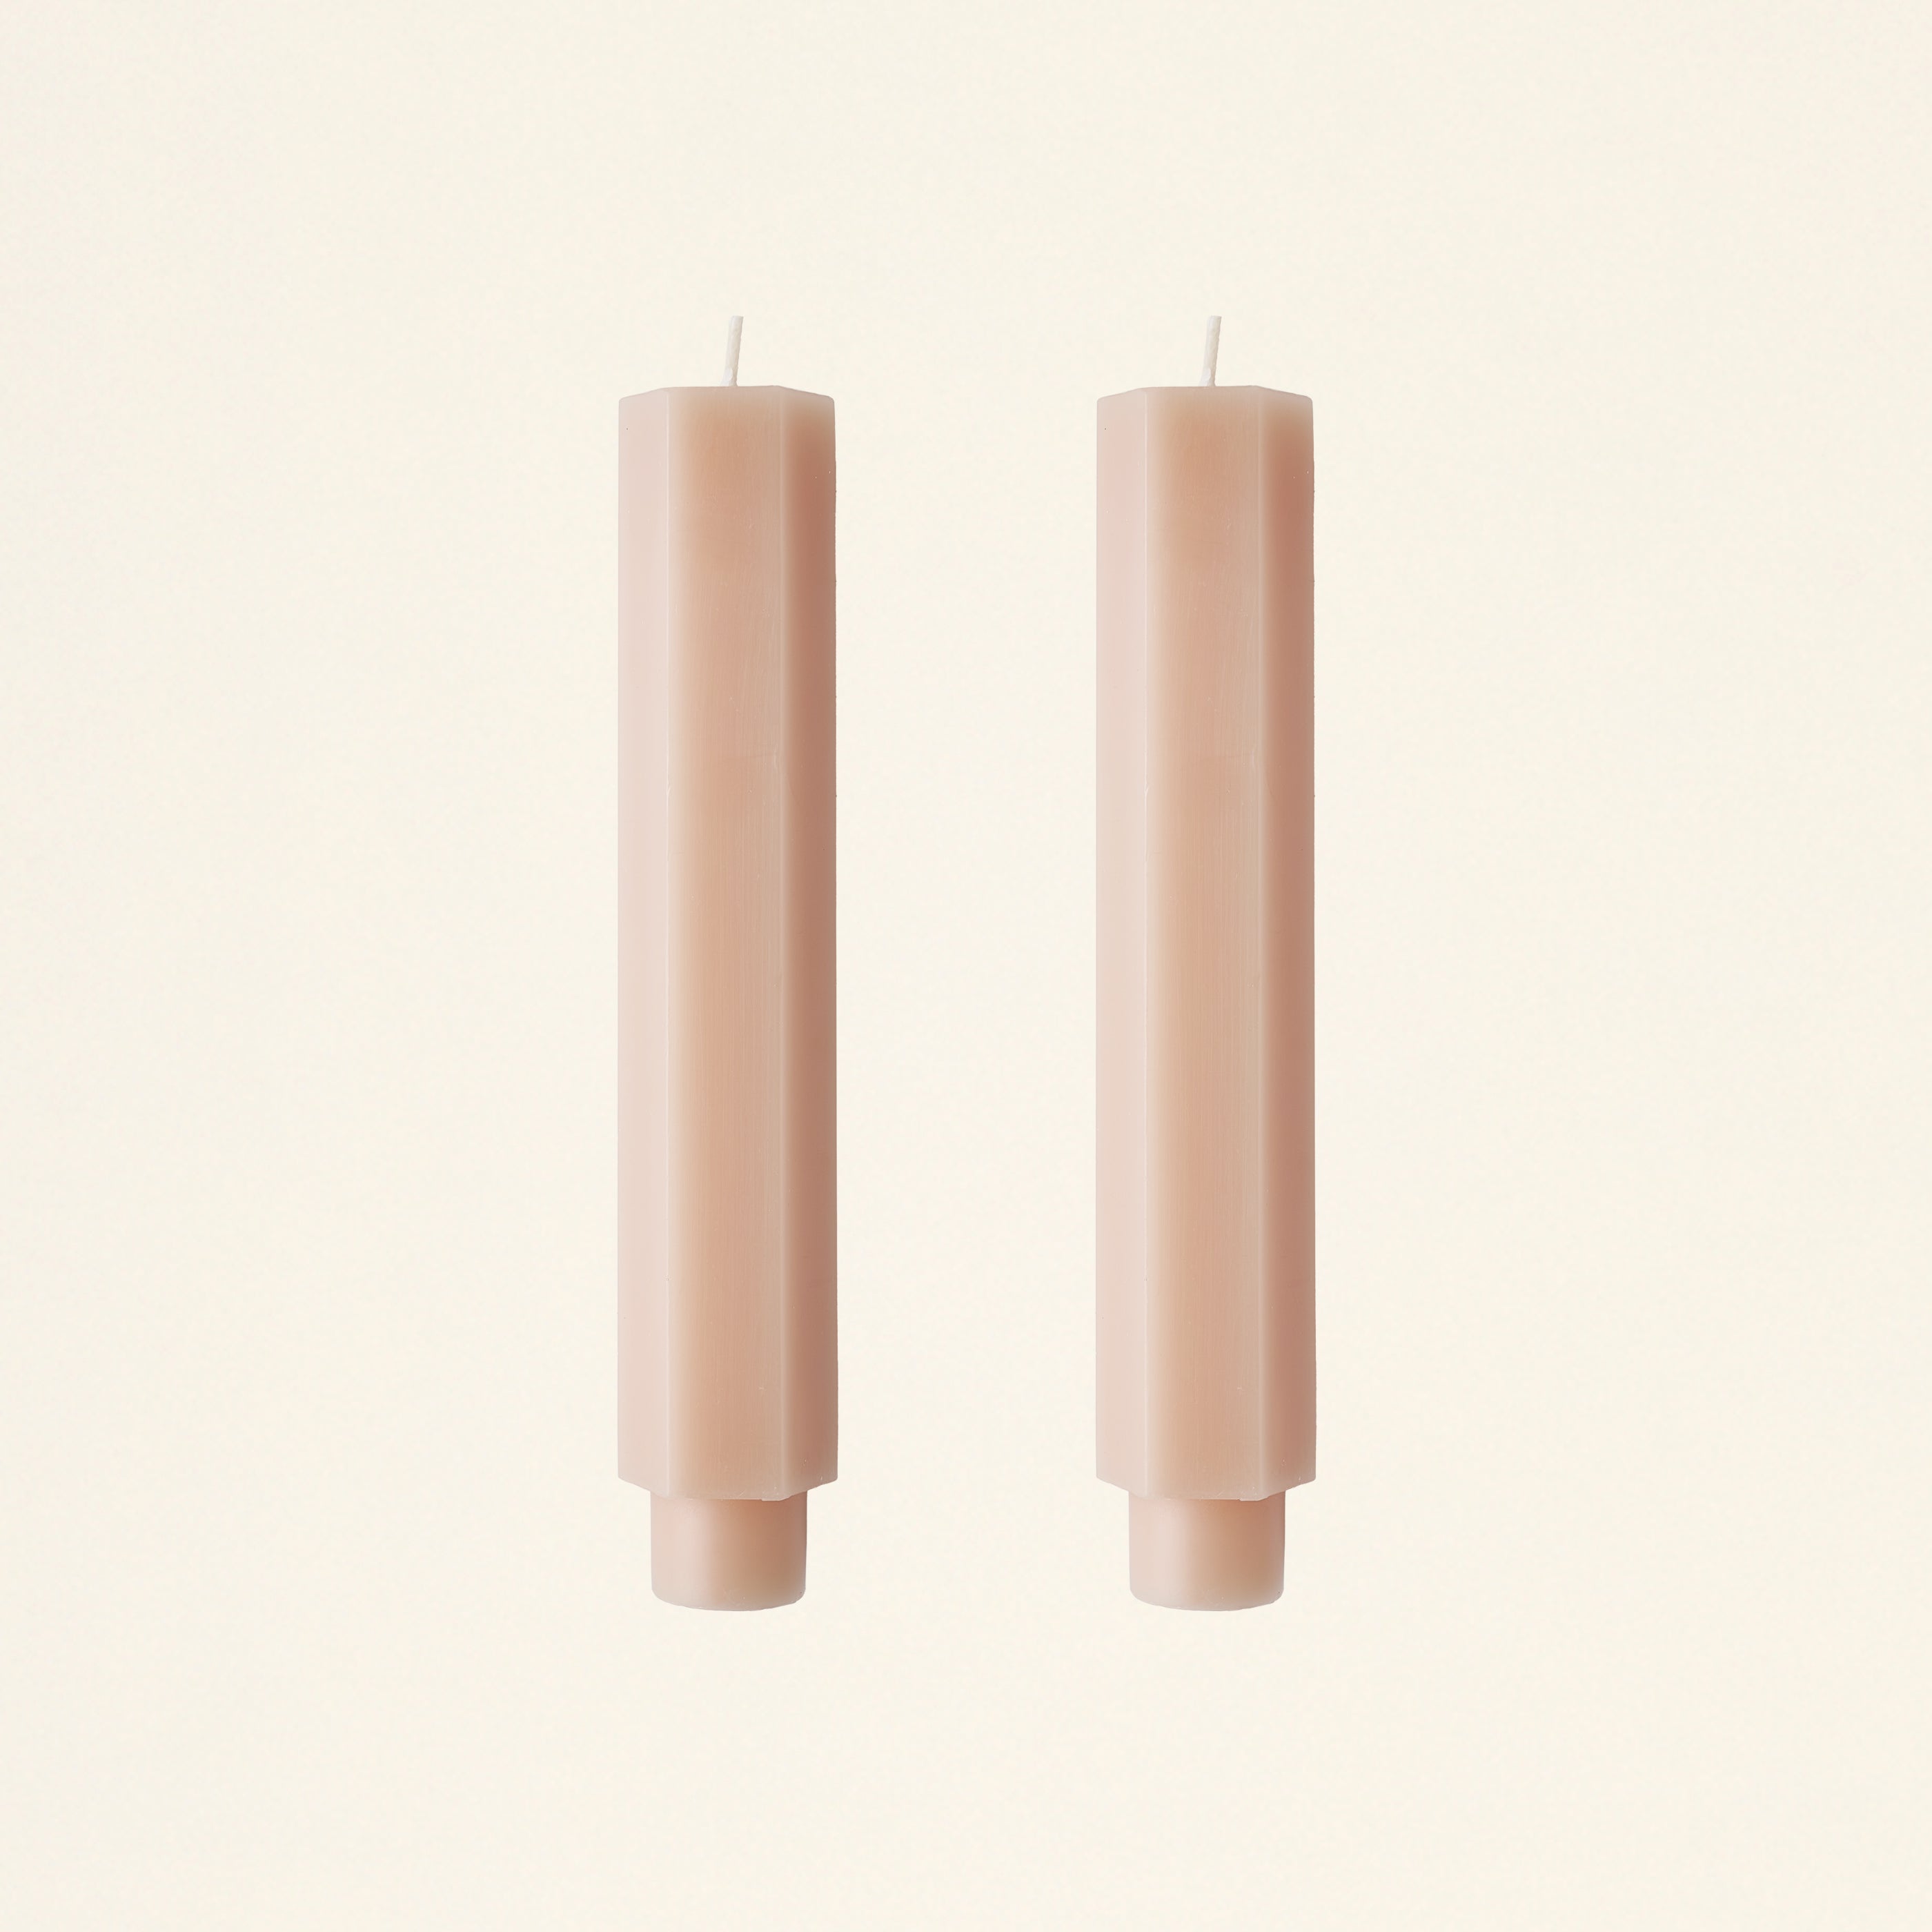 6" Hexagon Taper Candles - Set of 2